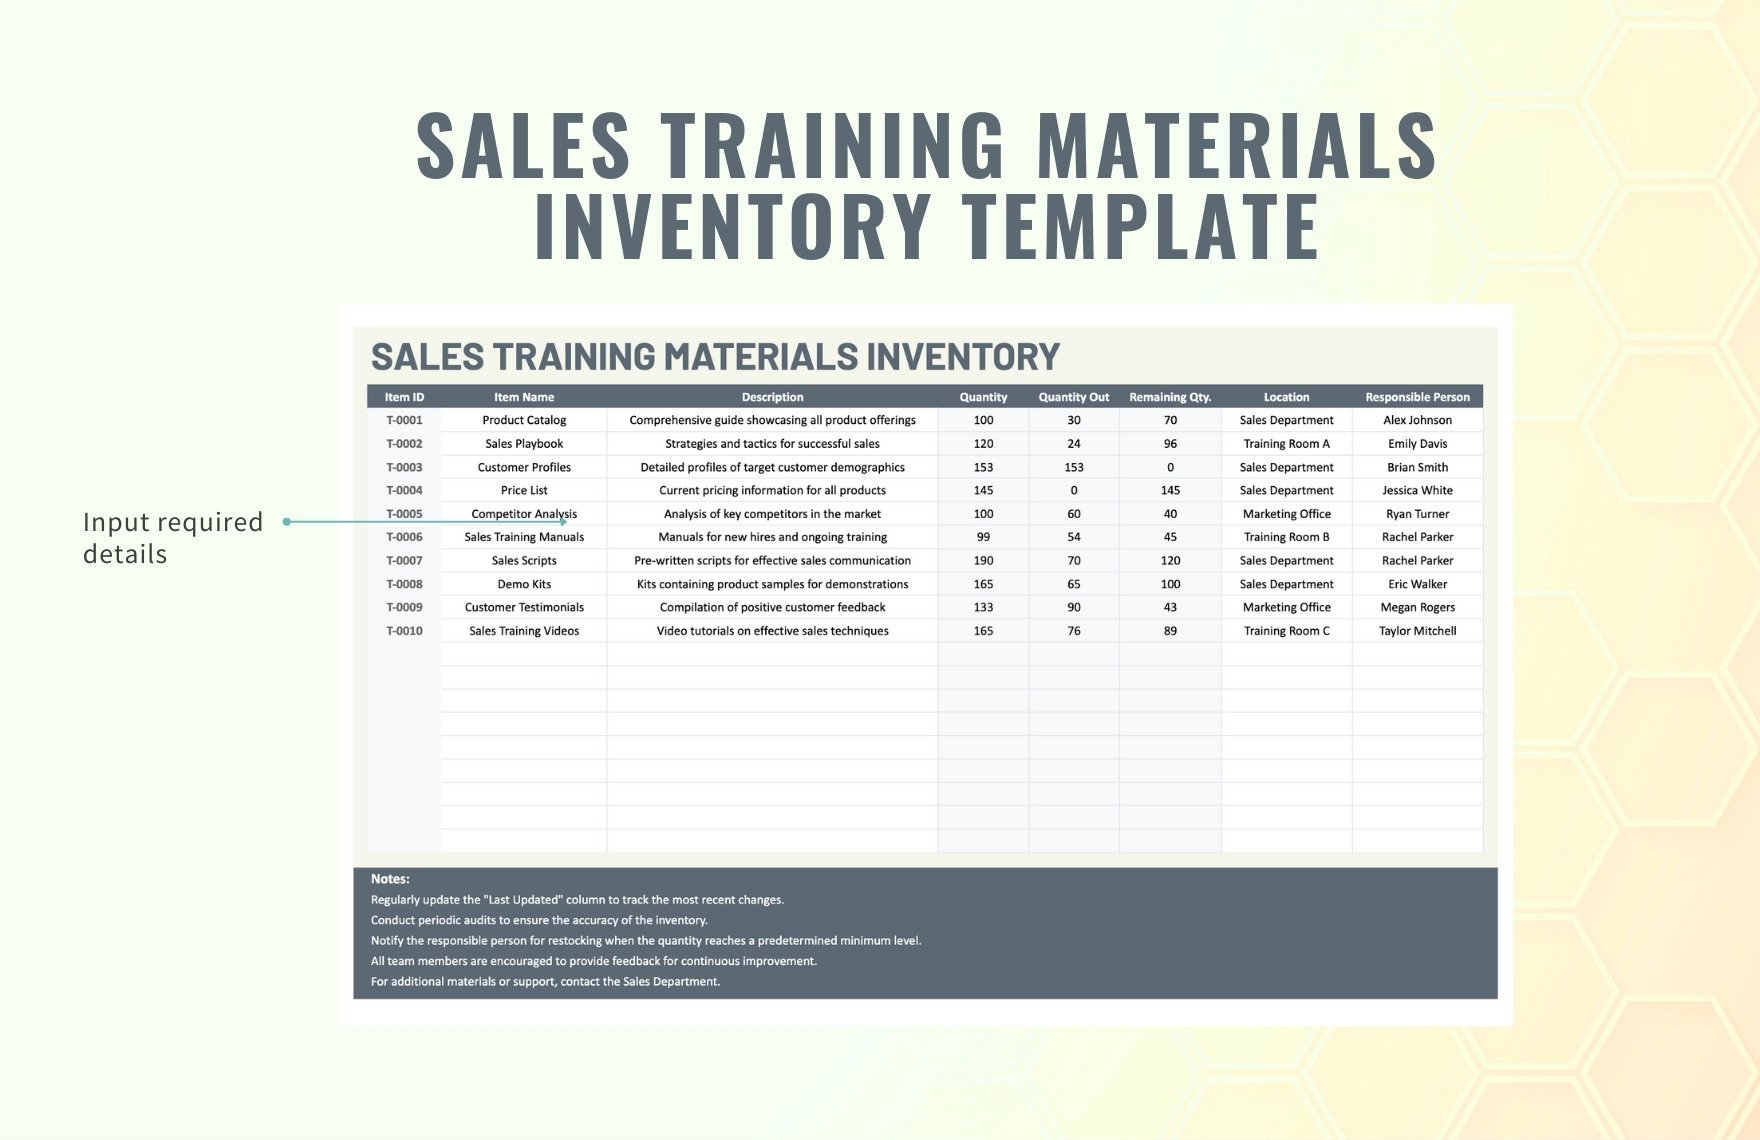 Sales Training Materials Inventory Template